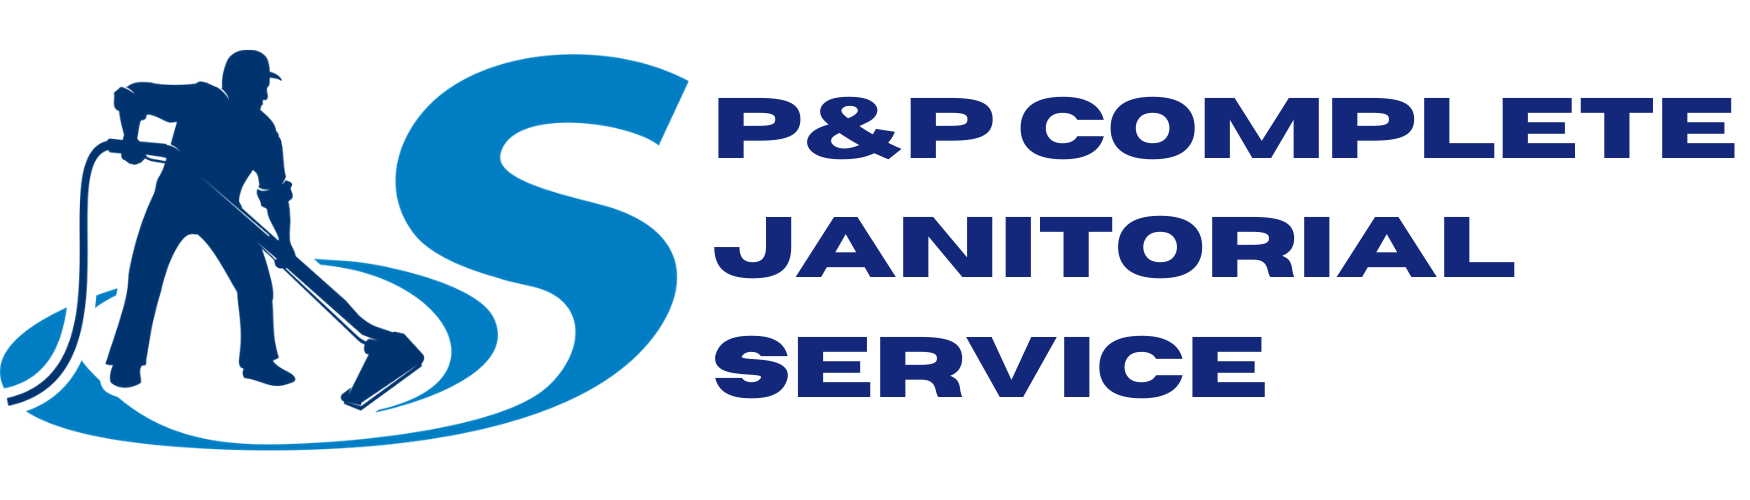 P&P Complete Janitorial Service